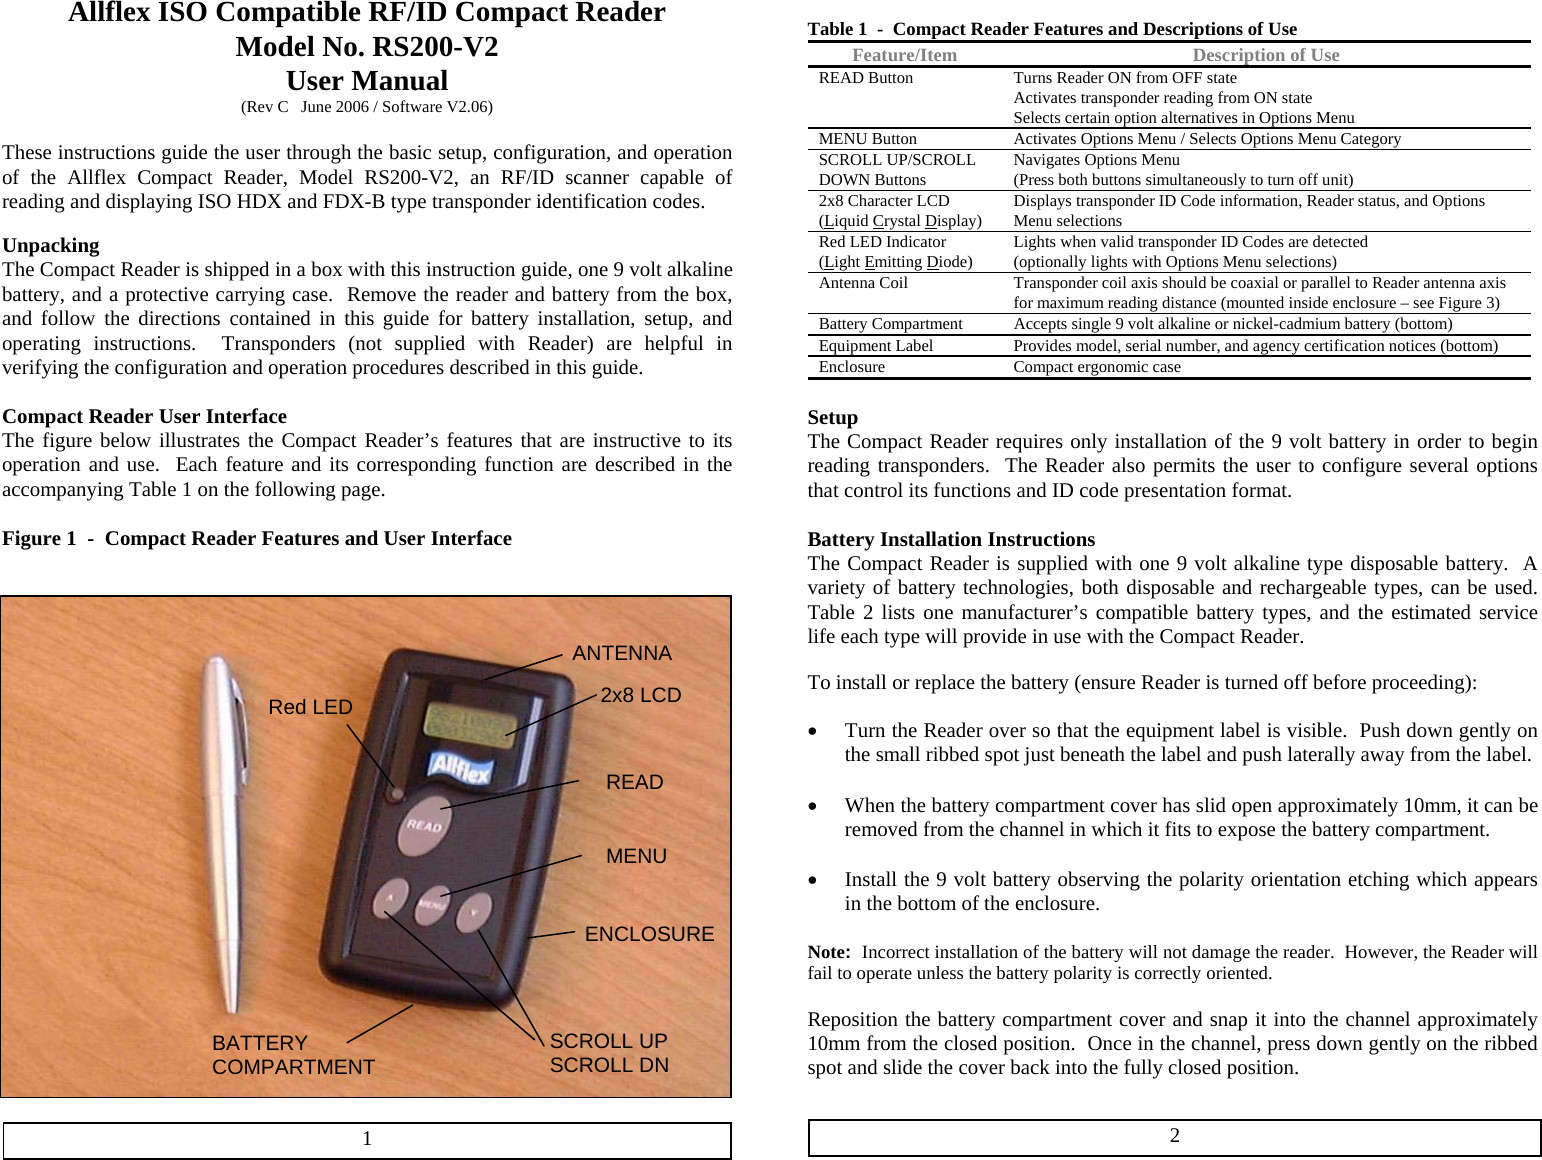 Allflex ISO Compatible RF/ID Compact Reader Model No. RS200-V2 User Manual (Rev C   June 2006 / Software V2.06)  These instructions guide the user through the basic setup, configuration, and operation of the Allflex Compact Reader, Model RS200-V2, an RF/ID scanner capable of reading and displaying ISO HDX and FDX-B type transponder identification codes.  Unpacking  The Compact Reader is shipped in a box with this instruction guide, one 9 volt alkaline battery, and a protective carrying case.  Remove the reader and battery from the box, and follow the directions contained in this guide for battery installation, setup, and operating instructions.  Transponders (not supplied with Reader) are helpful in verifying the configuration and operation procedures described in this guide.  Compact Reader User Interface The figure below illustrates the Compact Reader’s features that are instructive to its operation and use.  Each feature and its corresponding function are described in the accompanying Table 1 on the following page.  Figure 1  -  Compact Reader Features and User Interface   Table 1  -  Compact Reader Features and Descriptions of Use Feature/Item  Description of Use READ Button  Turns Reader ON from OFF state Activates transponder reading from ON state Selects certain option alternatives in Options Menu MENU Button  Activates Options Menu / Selects Options Menu Category SCROLL UP/SCROLL DOWN Buttons  Navigates Options Menu (Press both buttons simultaneously to turn off unit) 2x8 Character LCD (Liquid Crystal Display)  Displays transponder ID Code information, Reader status, and Options Menu selections Red LED Indicator (Light Emitting Diode)  Lights when valid transponder ID Codes are detected (optionally lights with Options Menu selections) Antenna Coil   Transponder coil axis should be coaxial or parallel to Reader antenna axis for maximum reading distance (mounted inside enclosure – see Figure 3) Battery Compartment  Accepts single 9 volt alkaline or nickel-cadmium battery (bottom) Equipment Label  Provides model, serial number, and agency certification notices (bottom) Enclosure  Compact ergonomic case  Setup The Compact Reader requires only installation of the 9 volt battery in order to begin reading transponders.  The Reader also permits the user to configure several options that control its functions and ID code presentation format.  Battery Installation Instructions The Compact Reader is supplied with one 9 volt alkaline type disposable battery.  A variety of battery technologies, both disposable and rechargeable types, can be used.  Table 2 lists one manufacturer’s compatible battery types, and the estimated service life each type will provide in use with the Compact Reader. ANTENNA  To install or replace the battery (ensure Reader is turned off before proceeding): 2x8 LCD   Red LED •  Turn the Reader over so that the equipment label is visible.  Push down gently on the small ribbed spot just beneath the label and push laterally away from the label.  READ•  When the battery compartment cover has slid open approximately 10mm, it can be removed from the channel in which it fits to expose the battery compartment.  MENU •  Install the 9 volt battery observing the polarity orientation etching which appears in the bottom of the enclosure.  ENCLOSURE Note:  Incorrect installation of the battery will not damage the reader.  However, the Reader will fail to operate unless the battery polarity is correctly oriented.   Reposition the battery compartment cover and snap it into the channel approximately 10mm from the closed position.  Once in the channel, press down gently on the ribbed spot and slide the cover back into the fully closed position.  SCROLL UP SCROLL DNBATTERY COMPARTMENT   2 1 